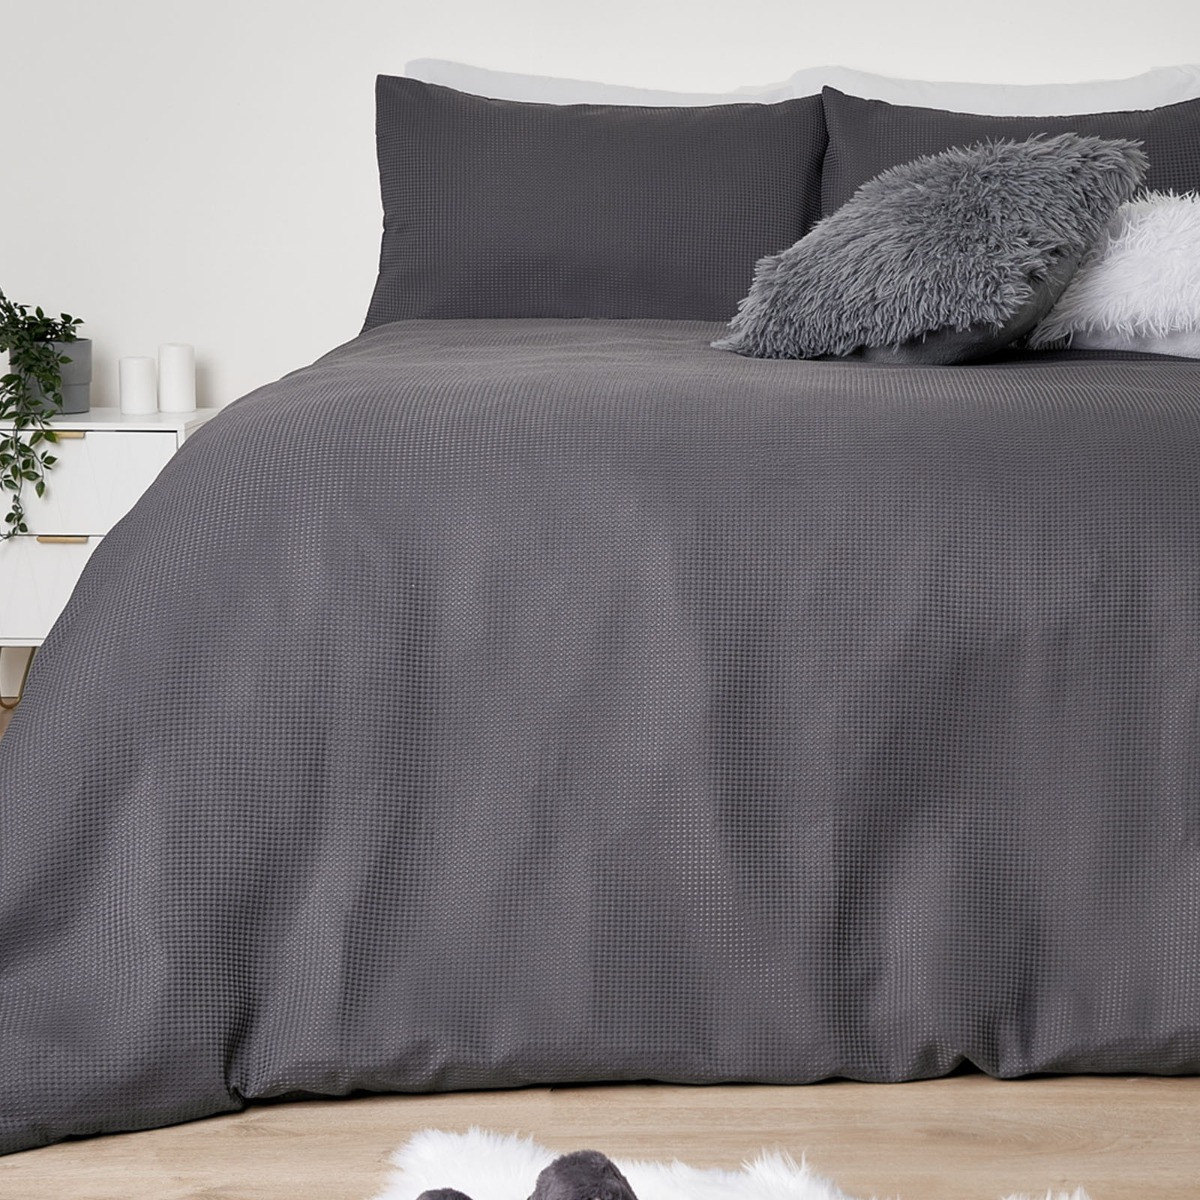 Sienna Waffle Weave Duvet Cover Set - Charcoal>